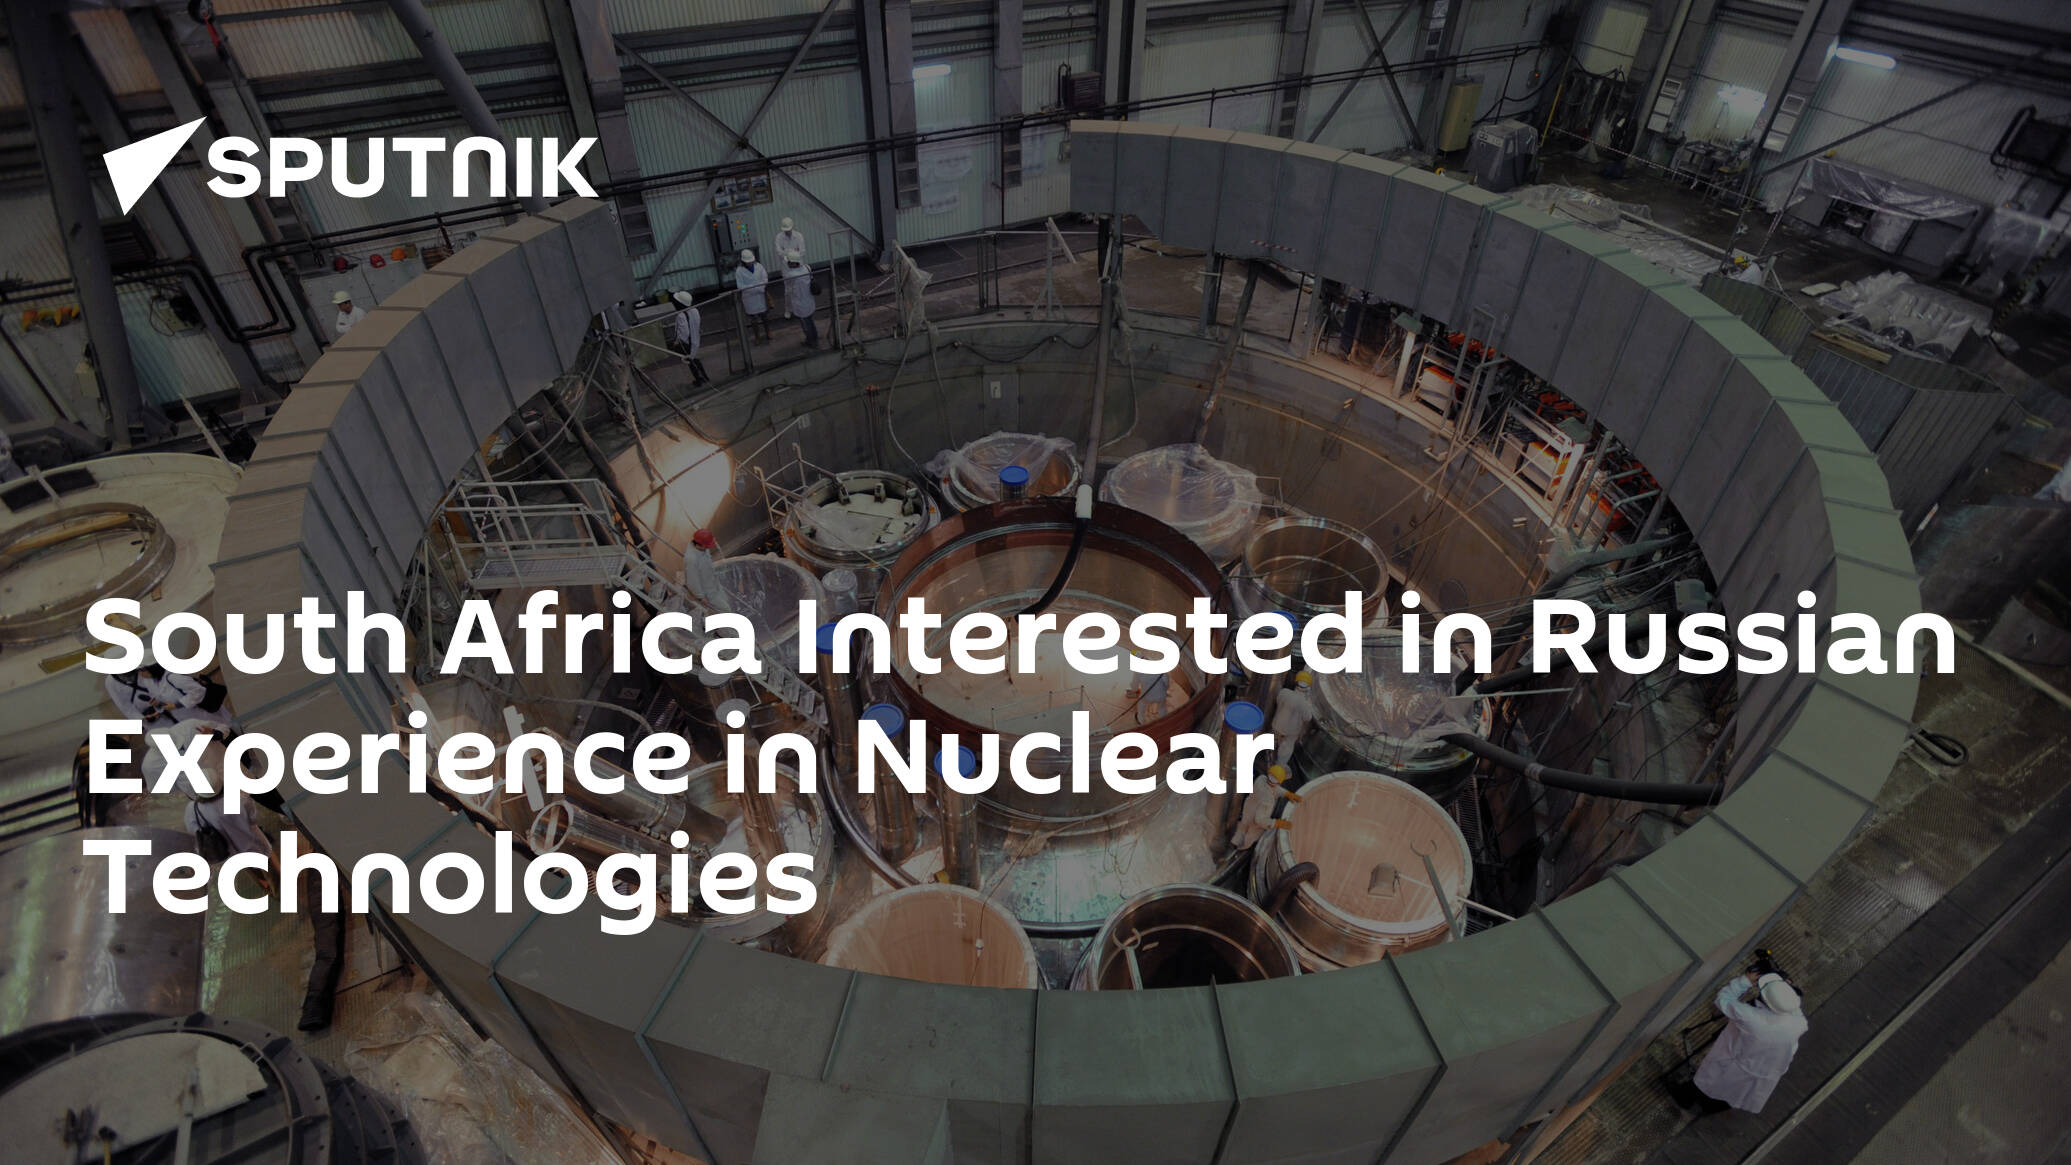 South Africa Interested in Russian Experience in Nuclear Technologies